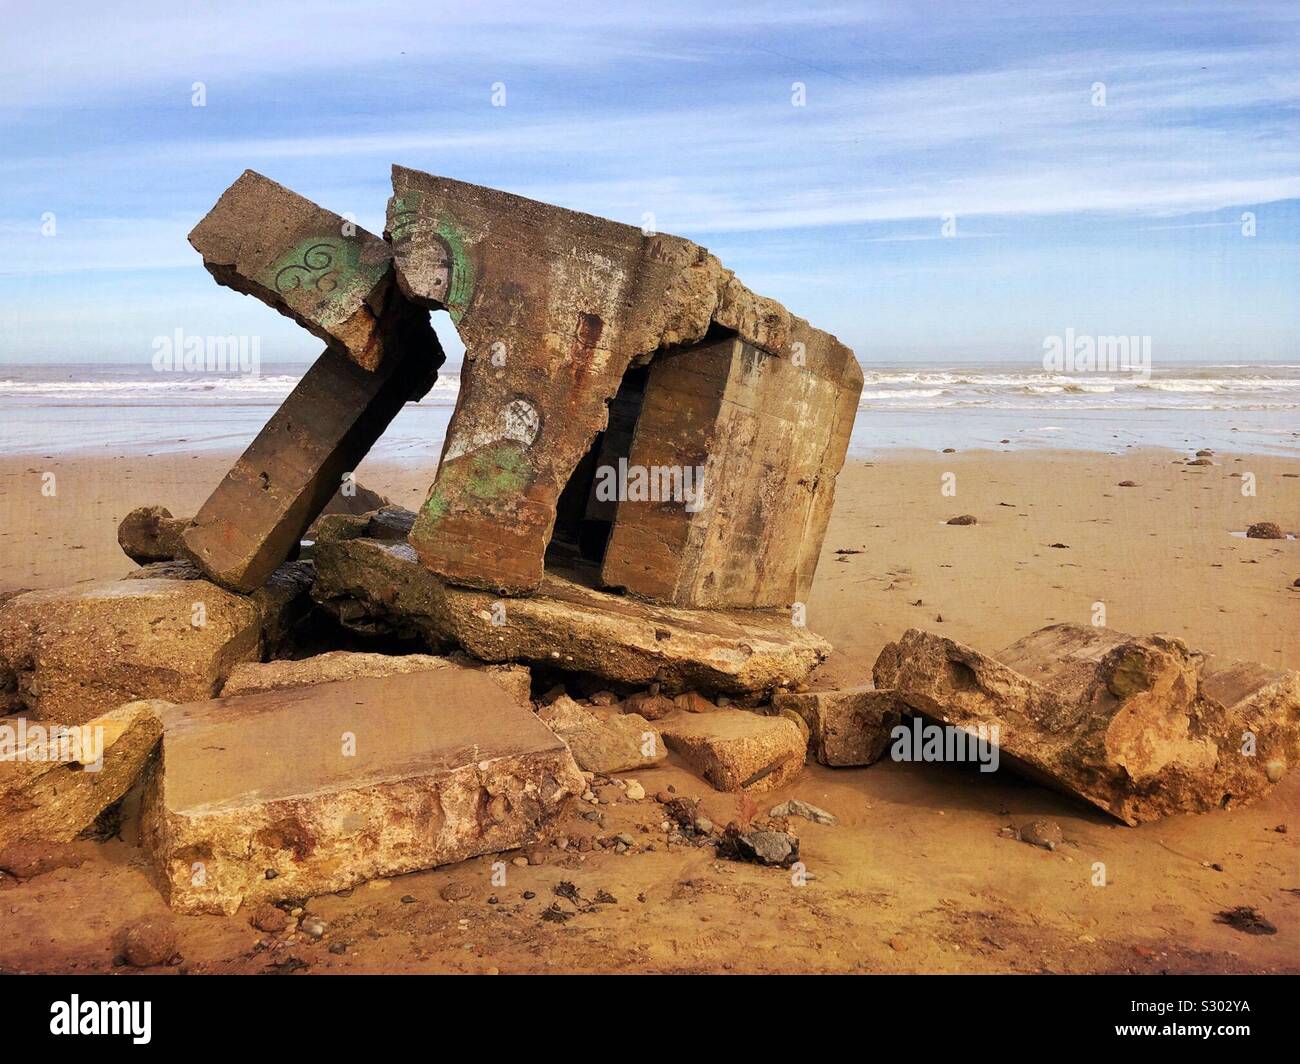 Remains of a WW2 concrete pillbox breaking up on the beach at Cayton Bay, North Yorkshire, UK. Stock Photo